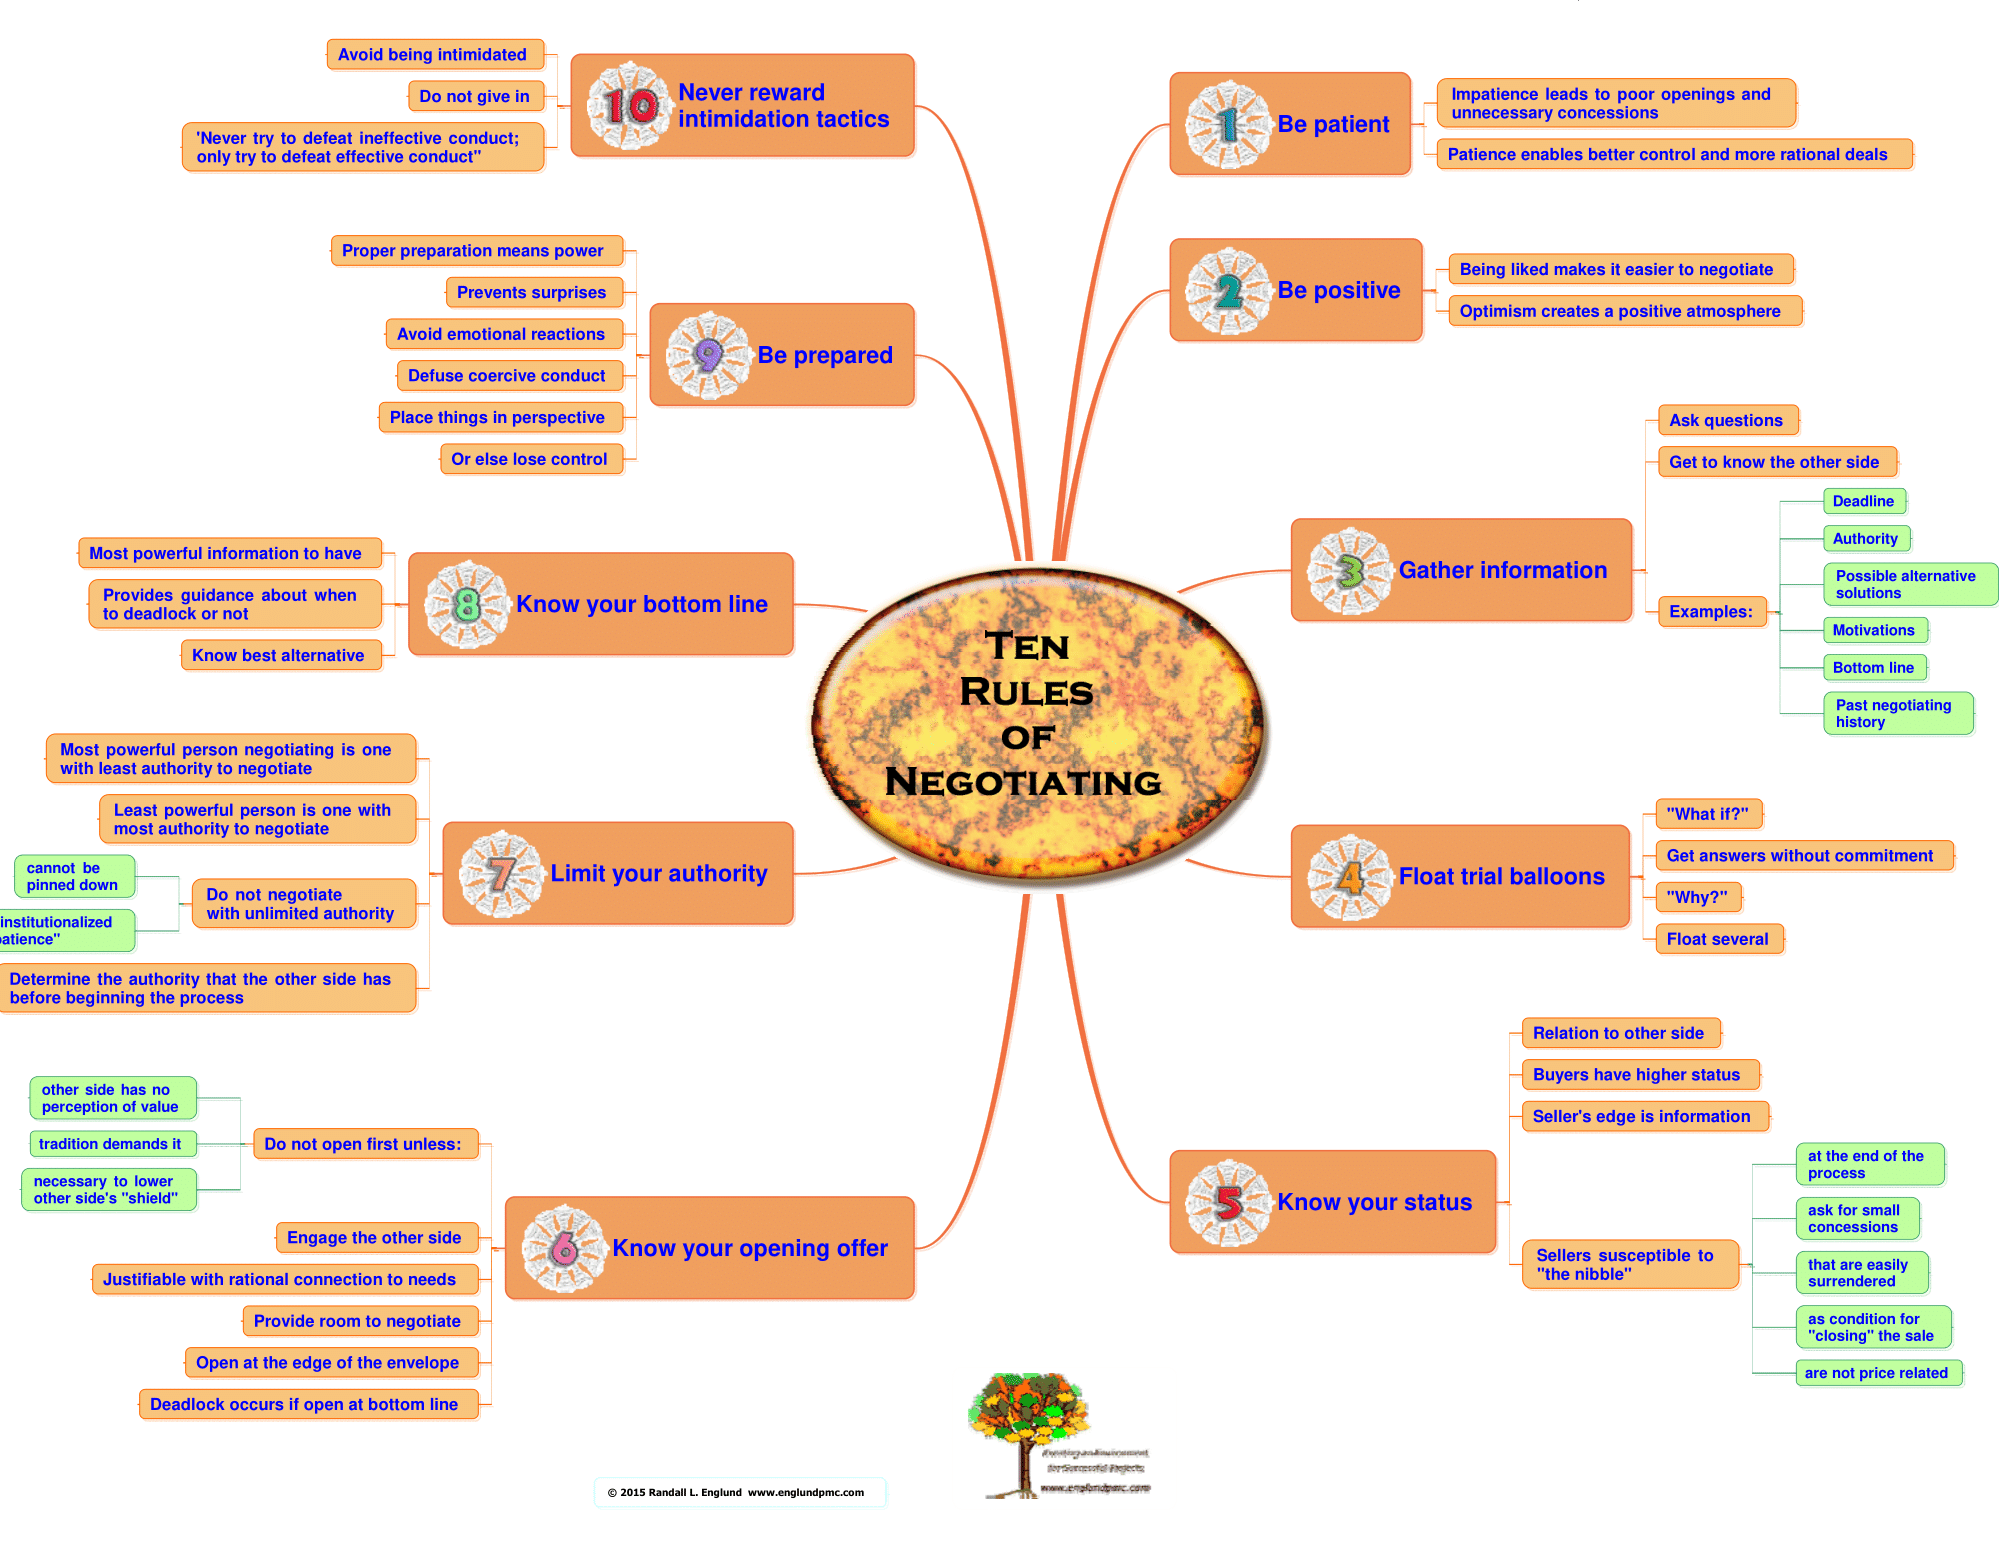 negotiation rules visualized in mind map